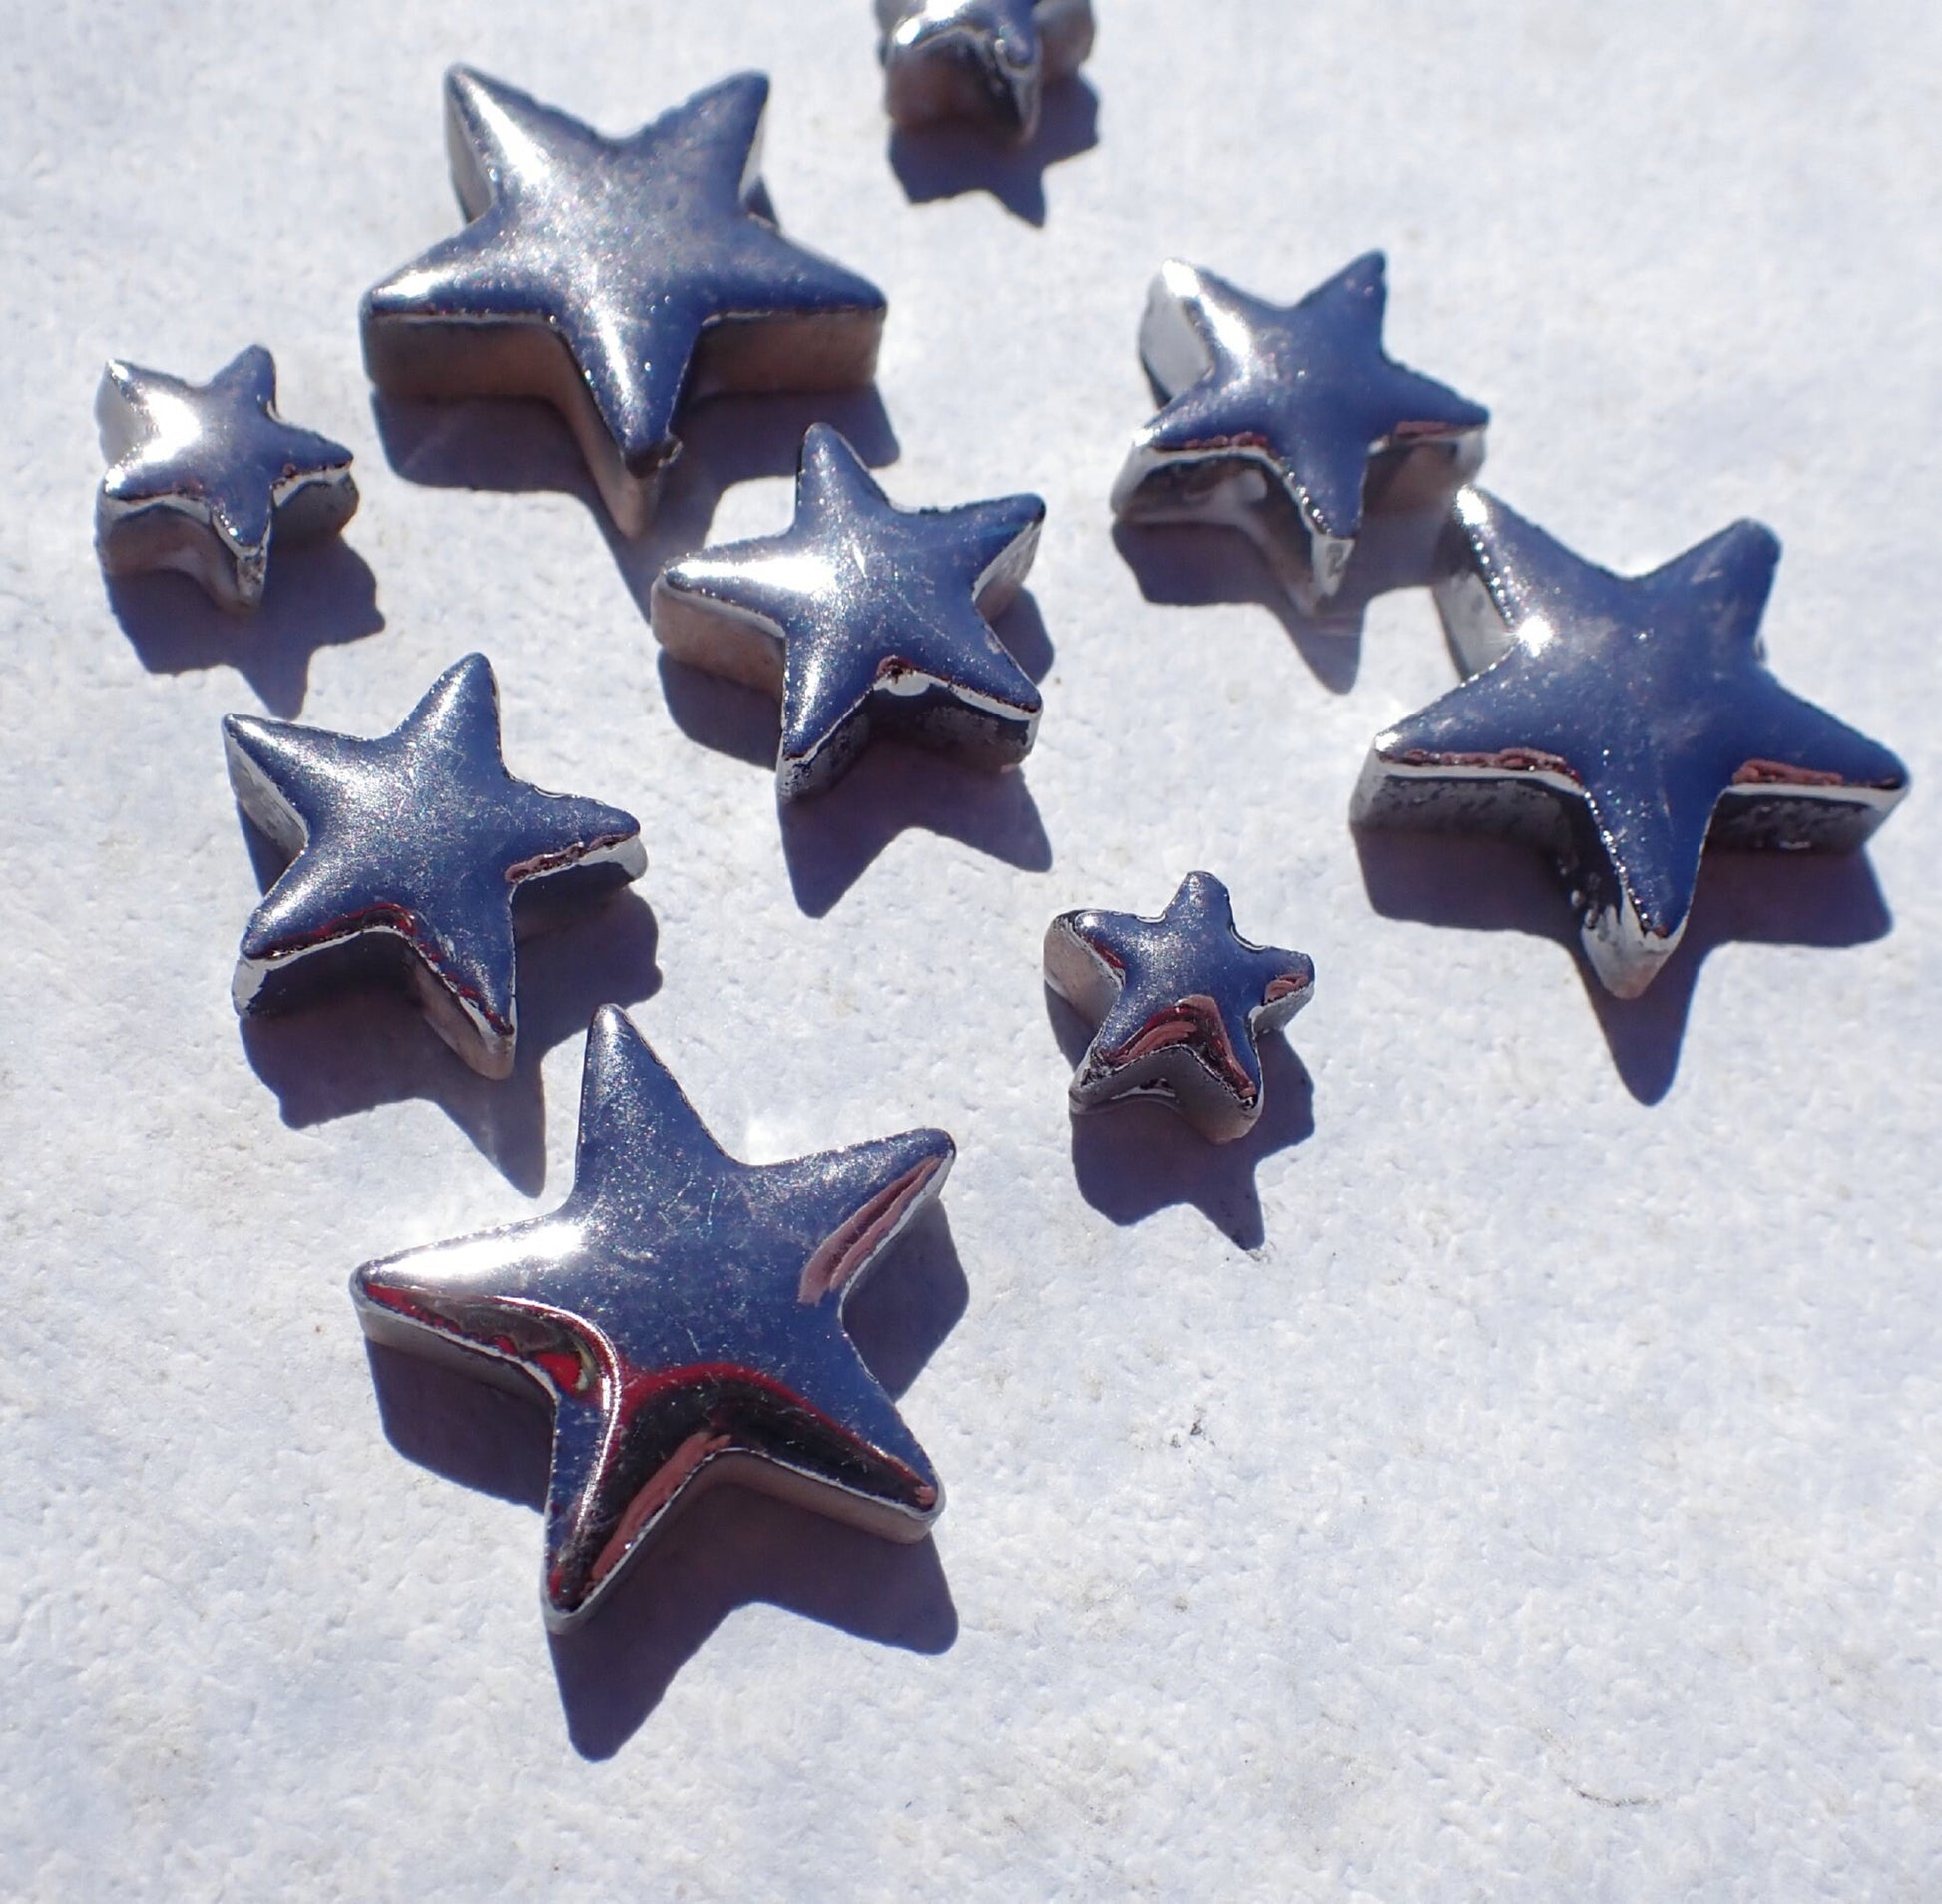 Silver Stars Mosaic Tiles - 50g Ceramic in Mix of 3 Sizes - 20mm, 15mm, 10mm